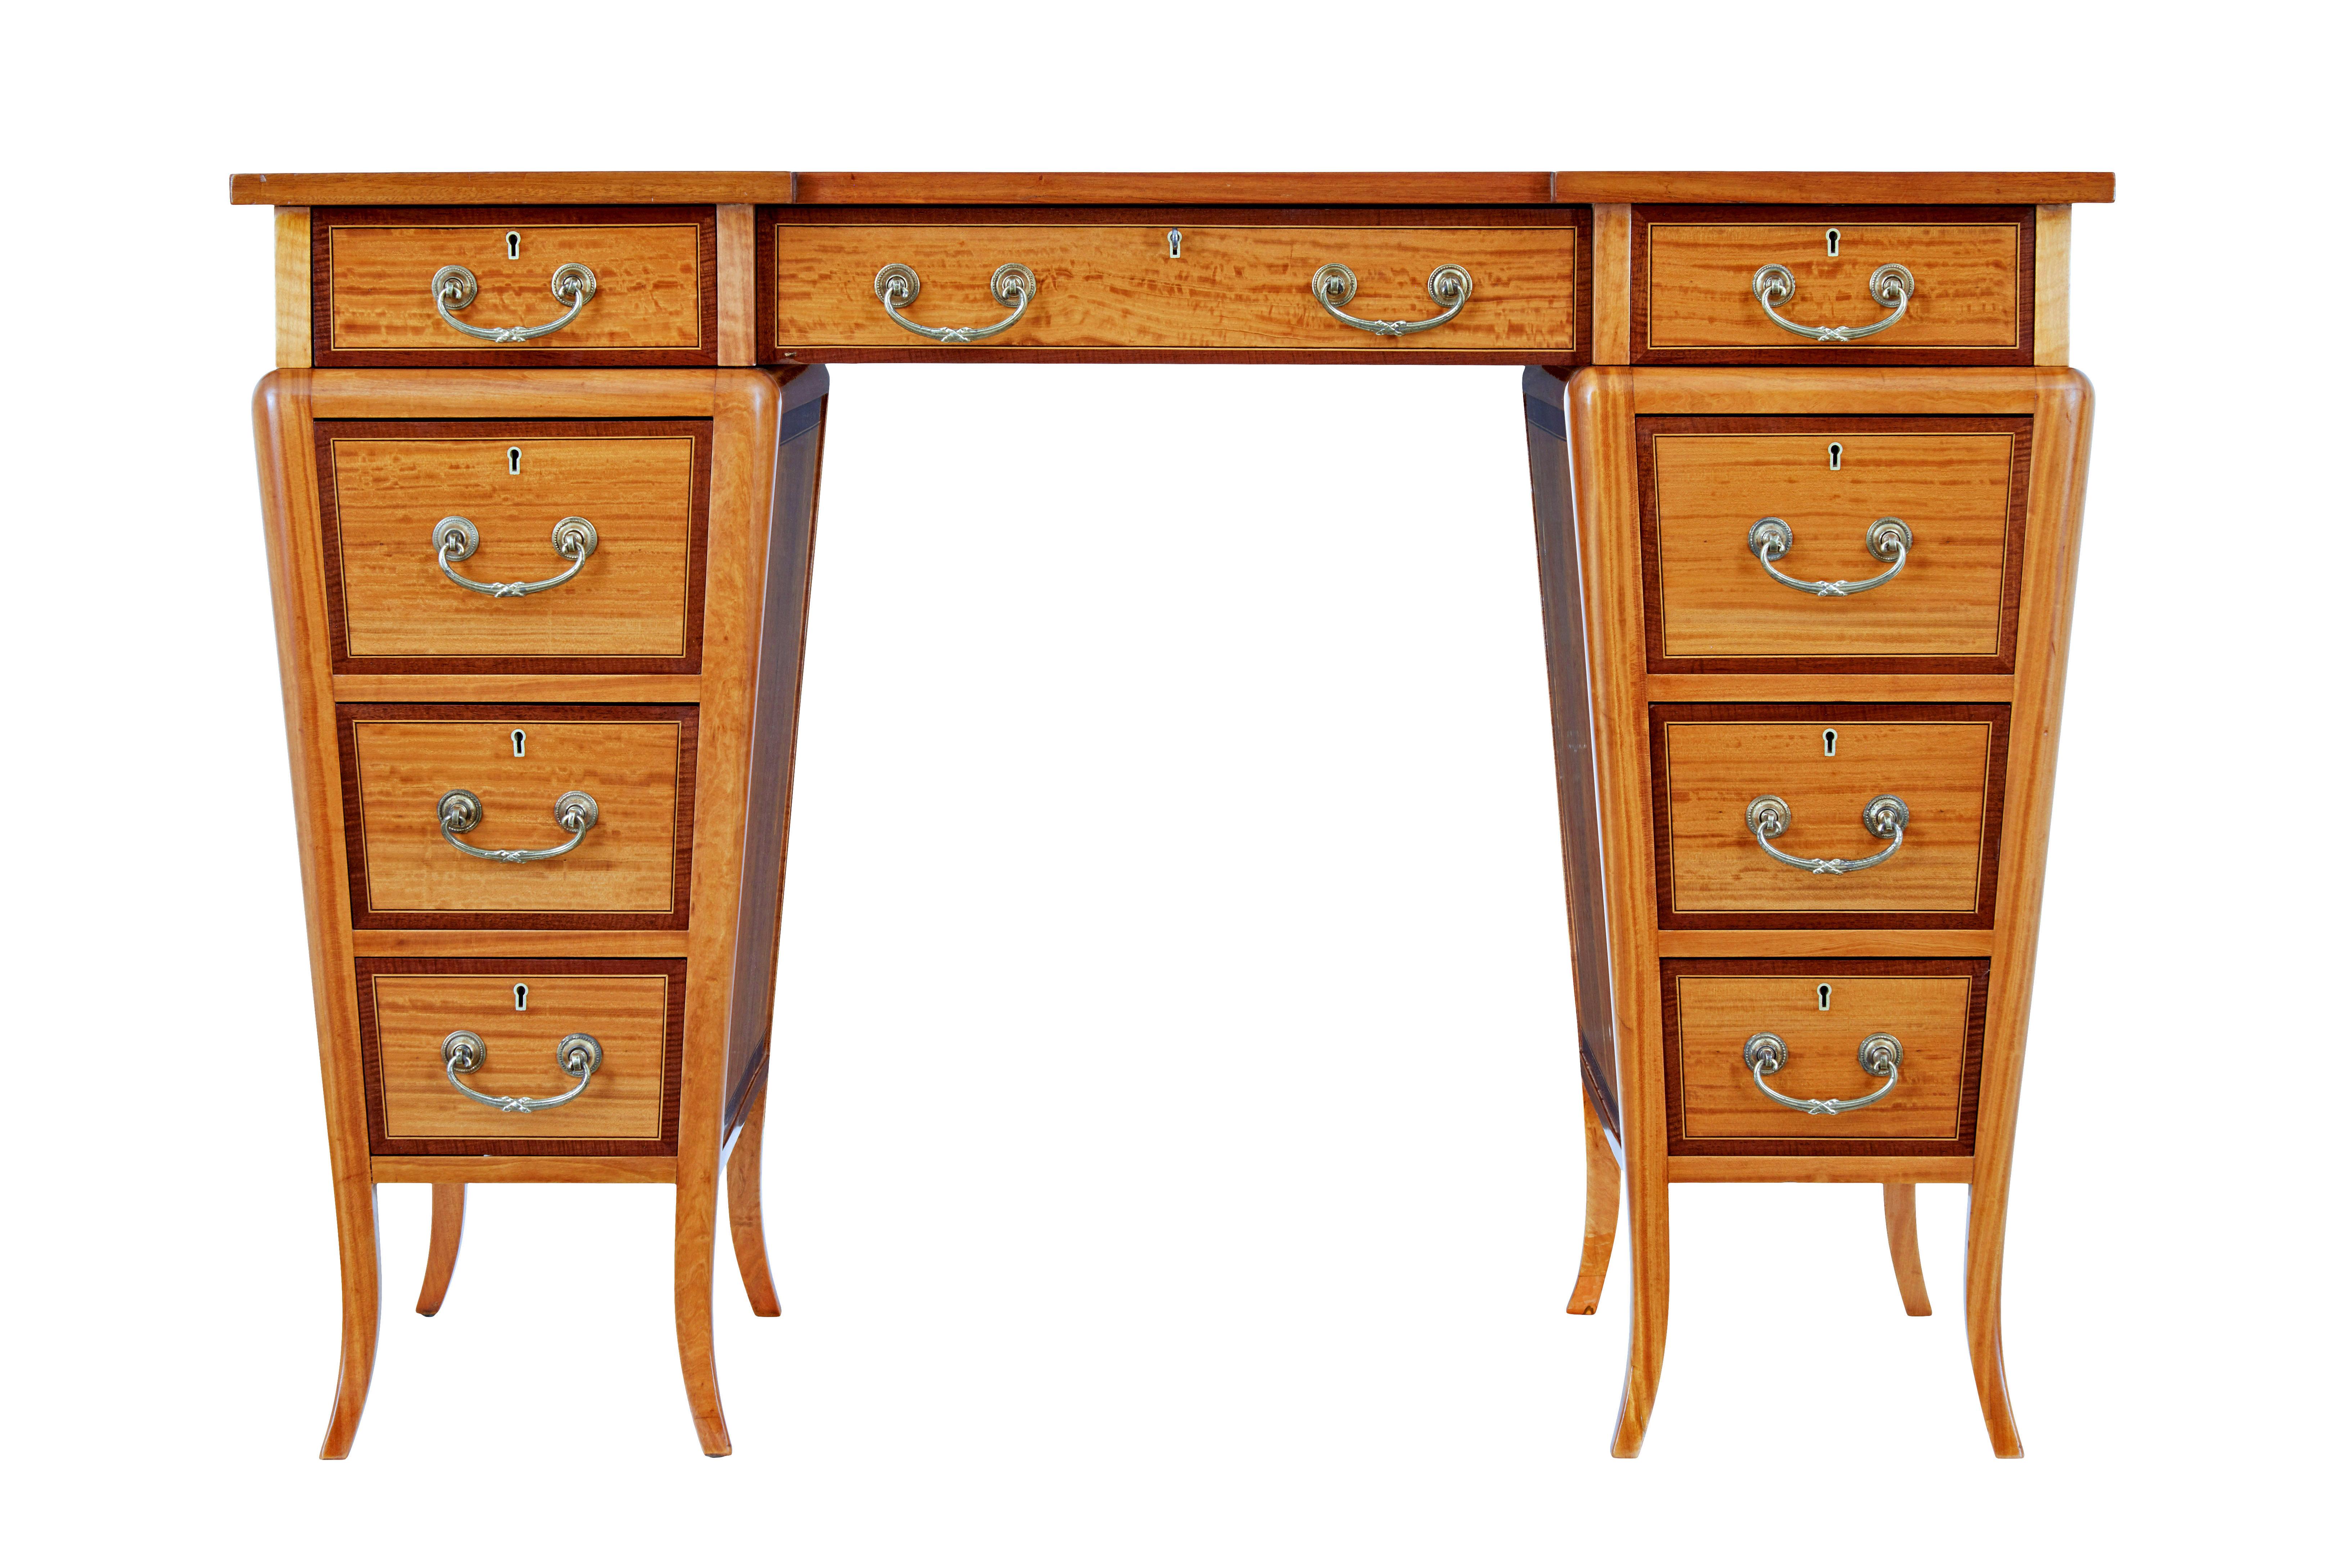 Sheraton Early 20th century satinwood sheraton revival desk For Sale